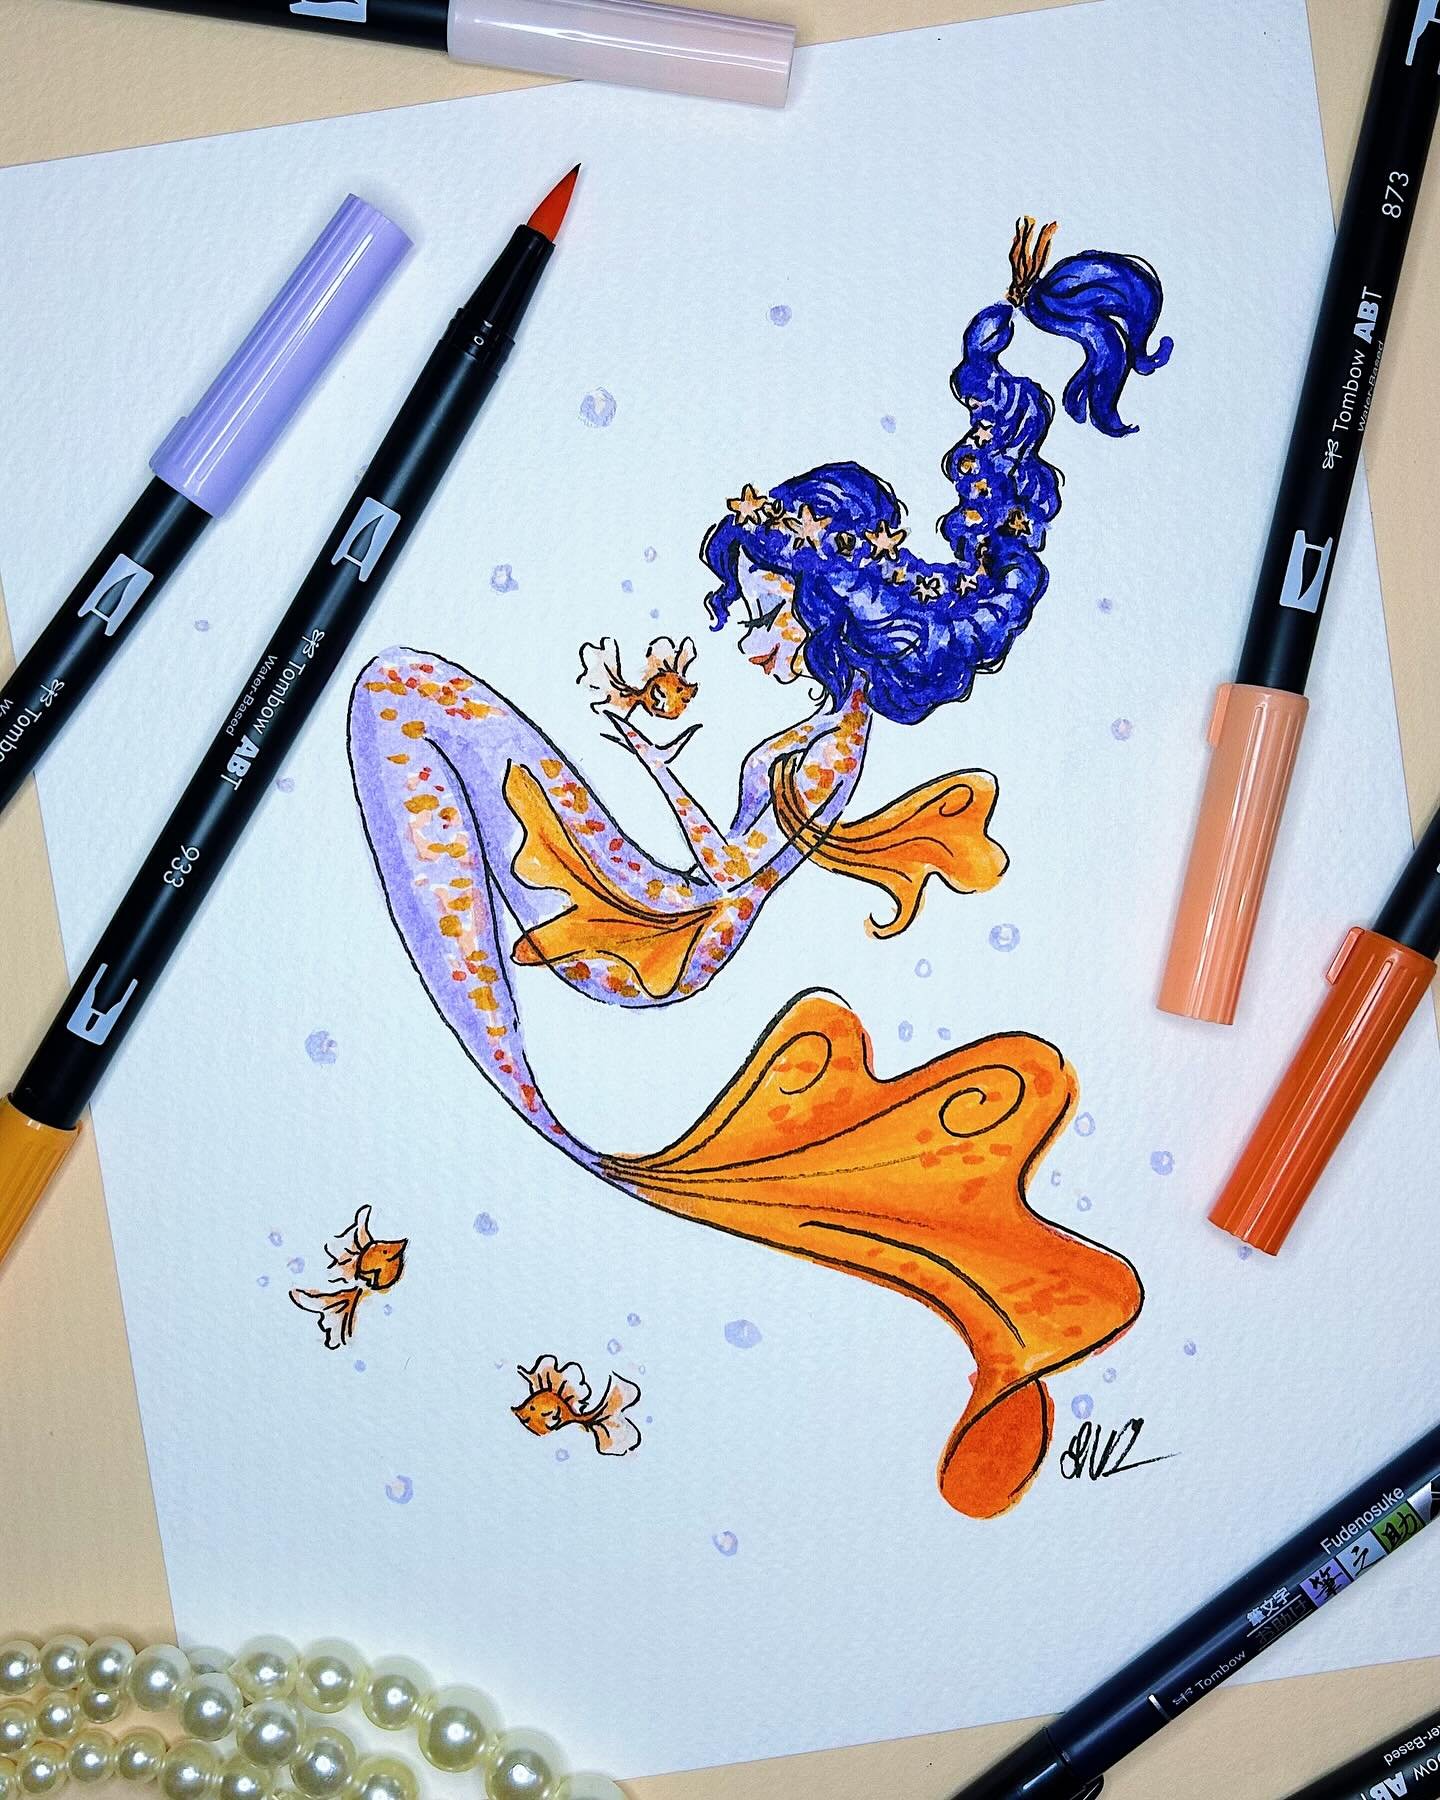 Who&rsquo;s your favorite mermaid? 1, 2, 3 or 4?
.
Happy MerMay! You lovelies know I&rsquo;m all about drawing fantastical females, and mermaids are one of my favorites! Here are some originals that I&rsquo;ve created for MerMay so far. I won&rsquo;t